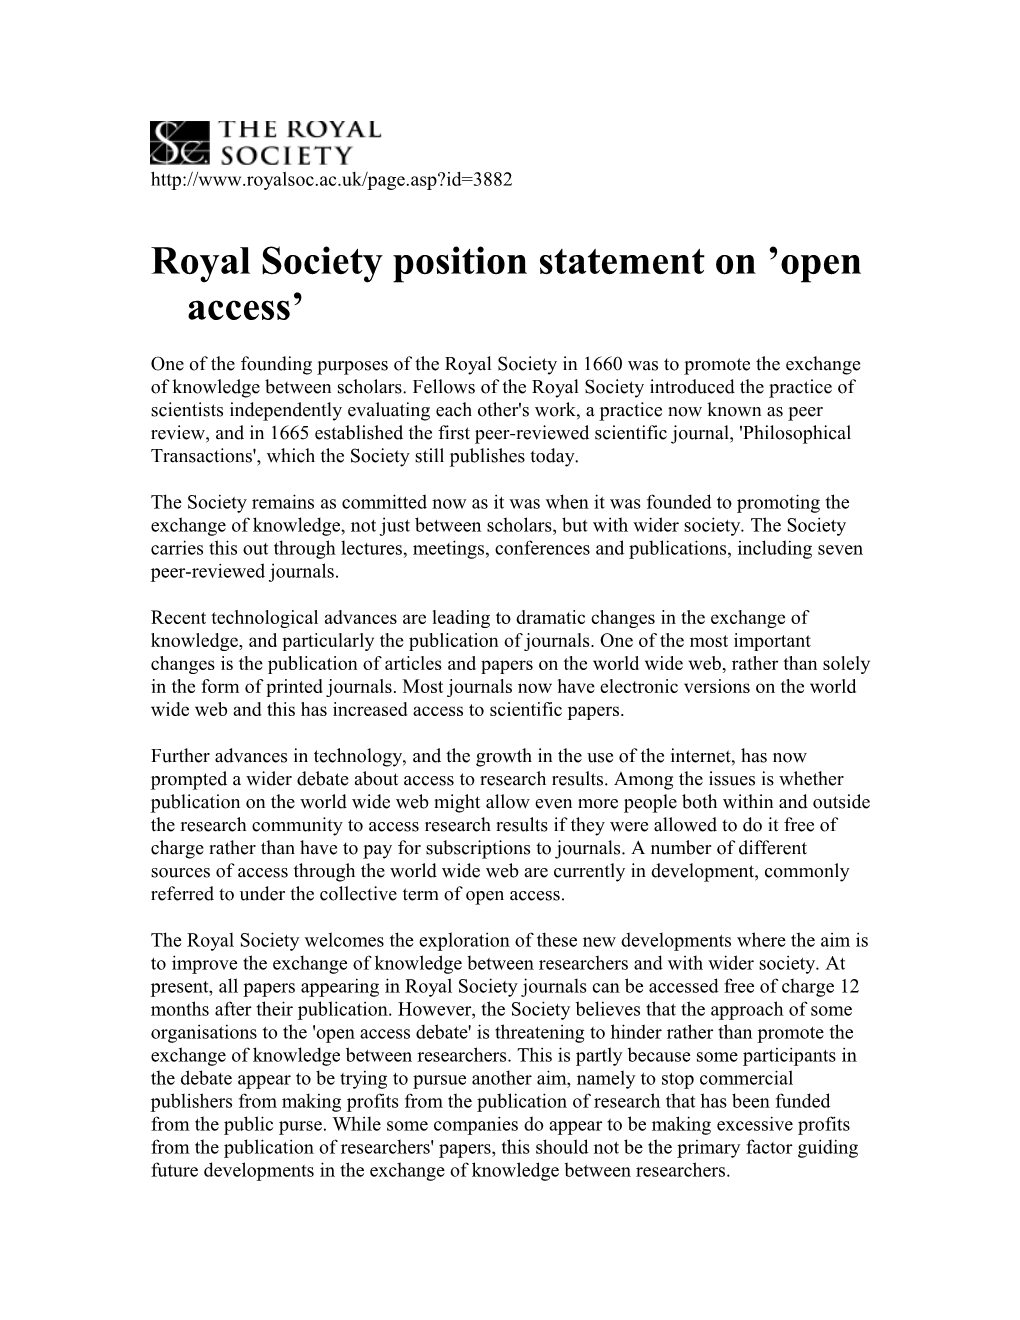 Royal Society Position Statement on Open Access